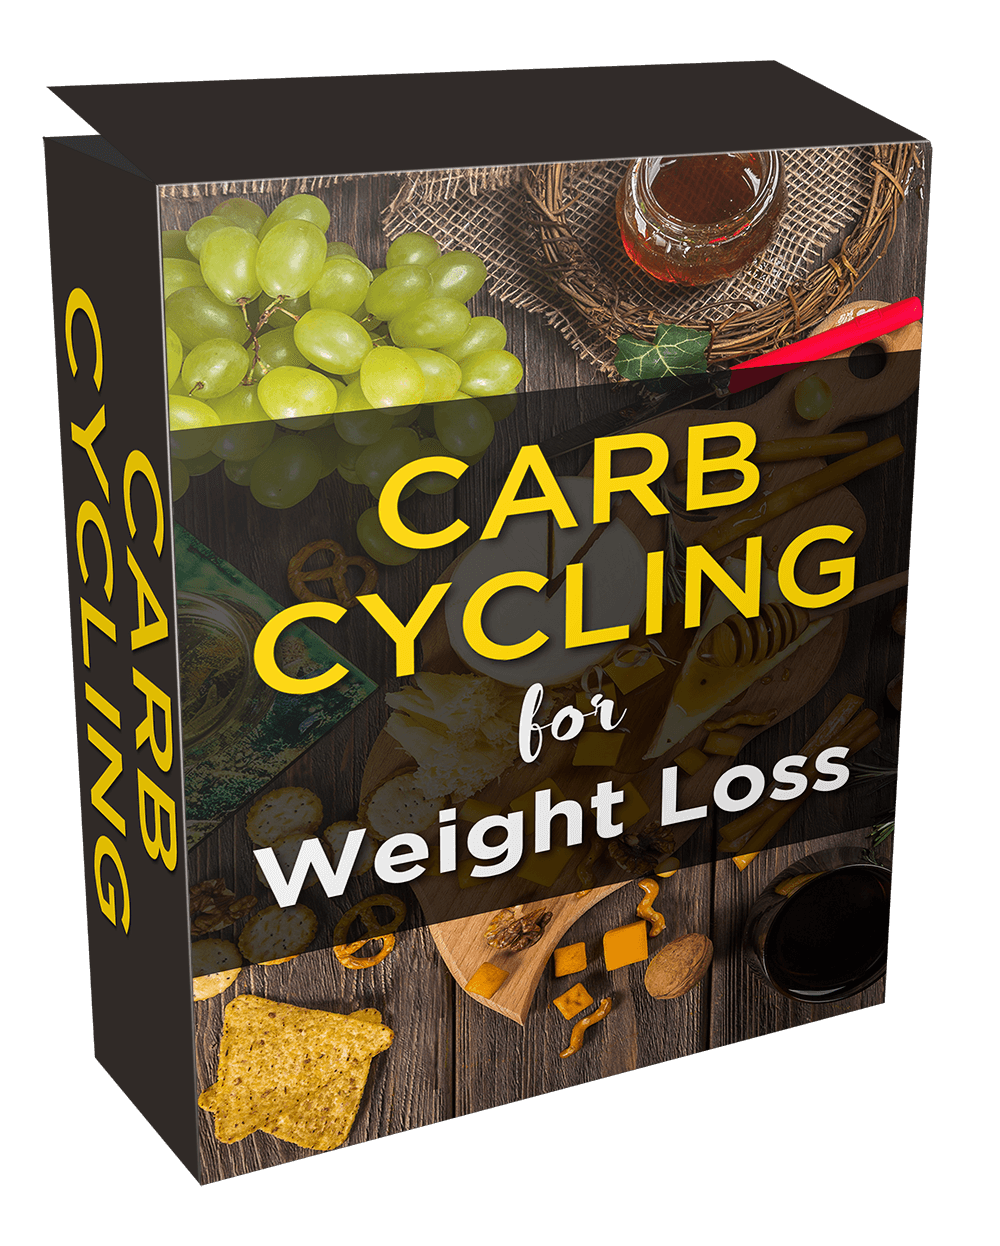 Carb Cycling for weight Loss video download: A Comprehensive guide to Carb cycling for weight loss, burning fat, complete diet plan.